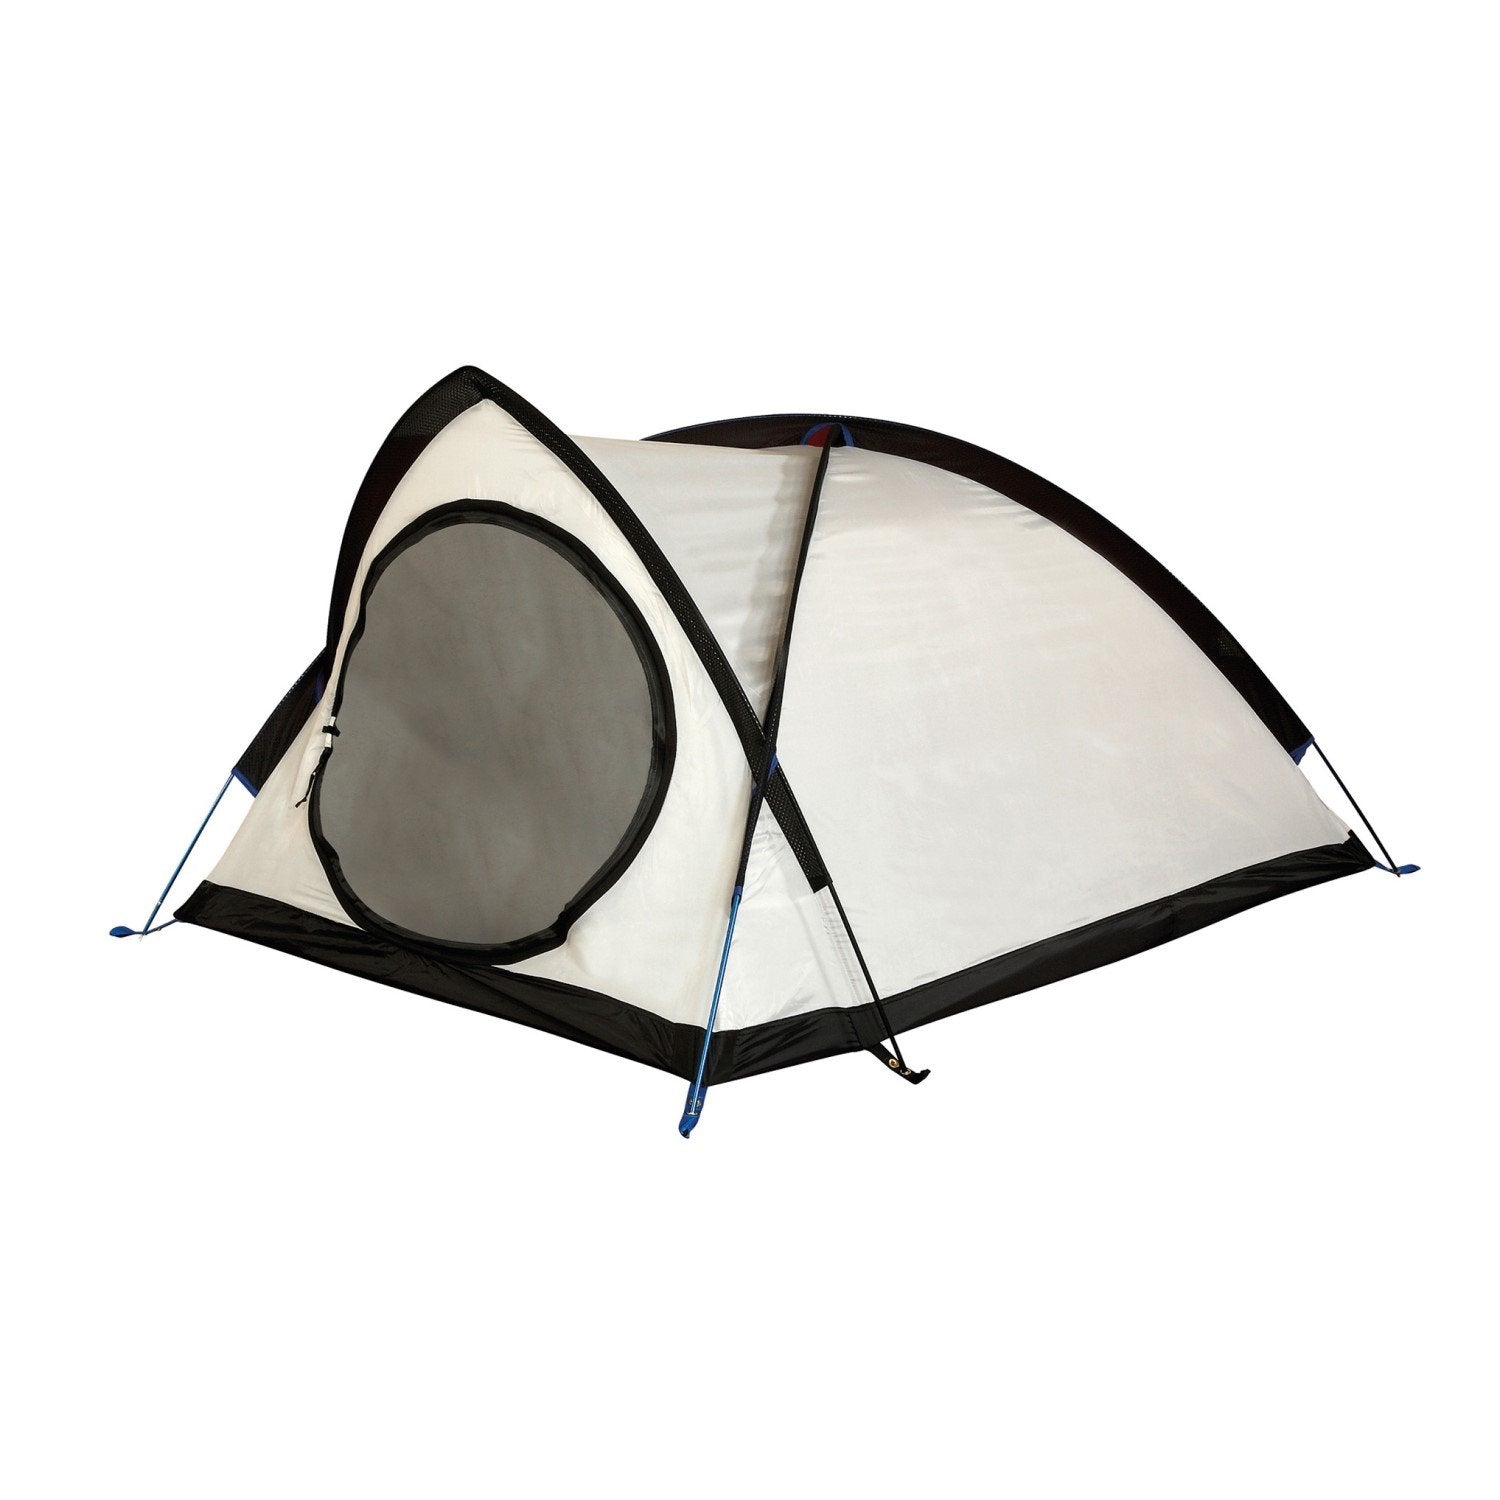 Wild Country Trisar 2 Tent - 2 Person Tent